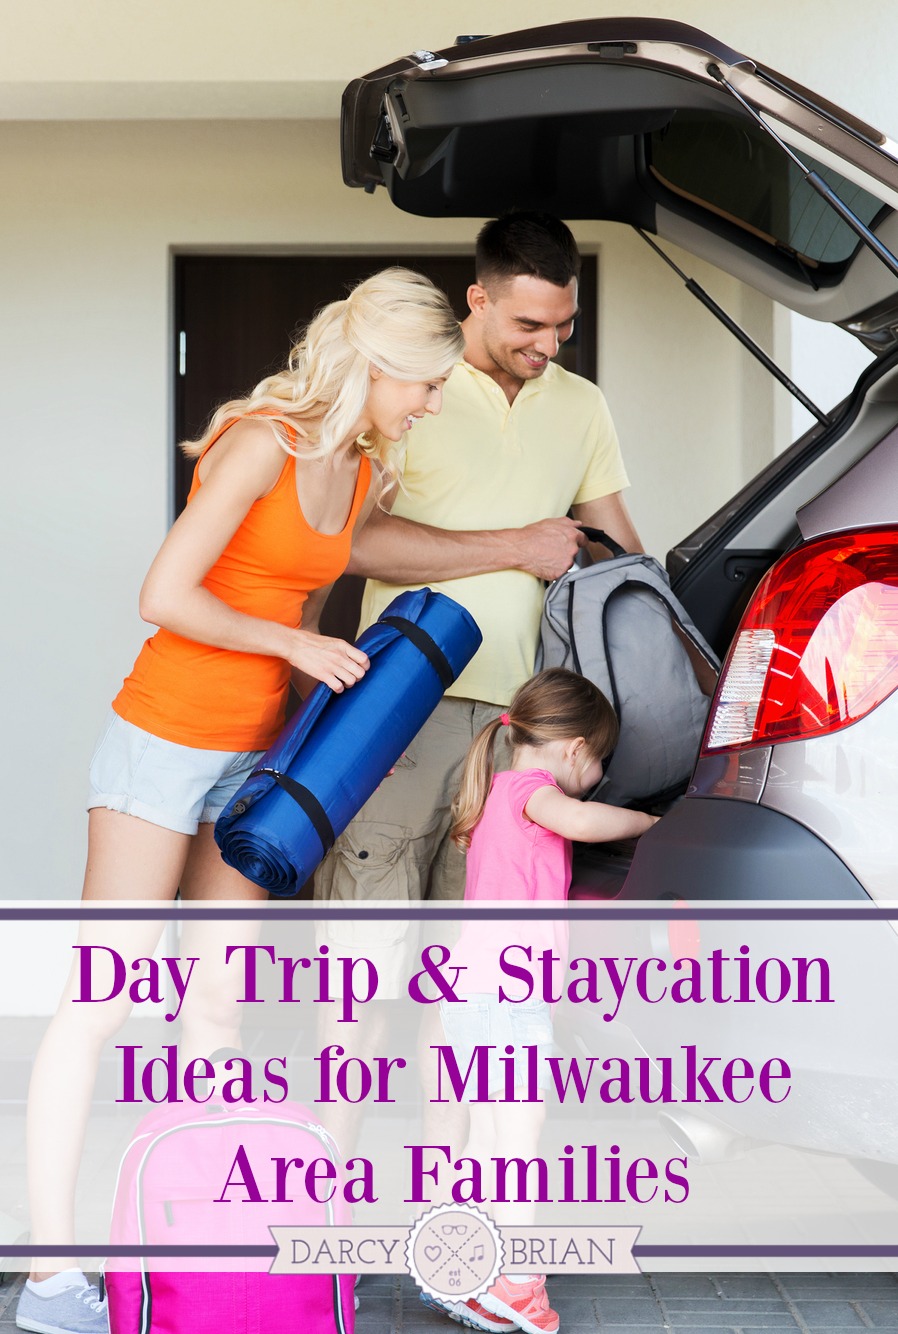 Looking for staycation ideas near Milwaukee, Wisconsin? Here are several family friendly destinations within driving distance of Metro Milwaukee.